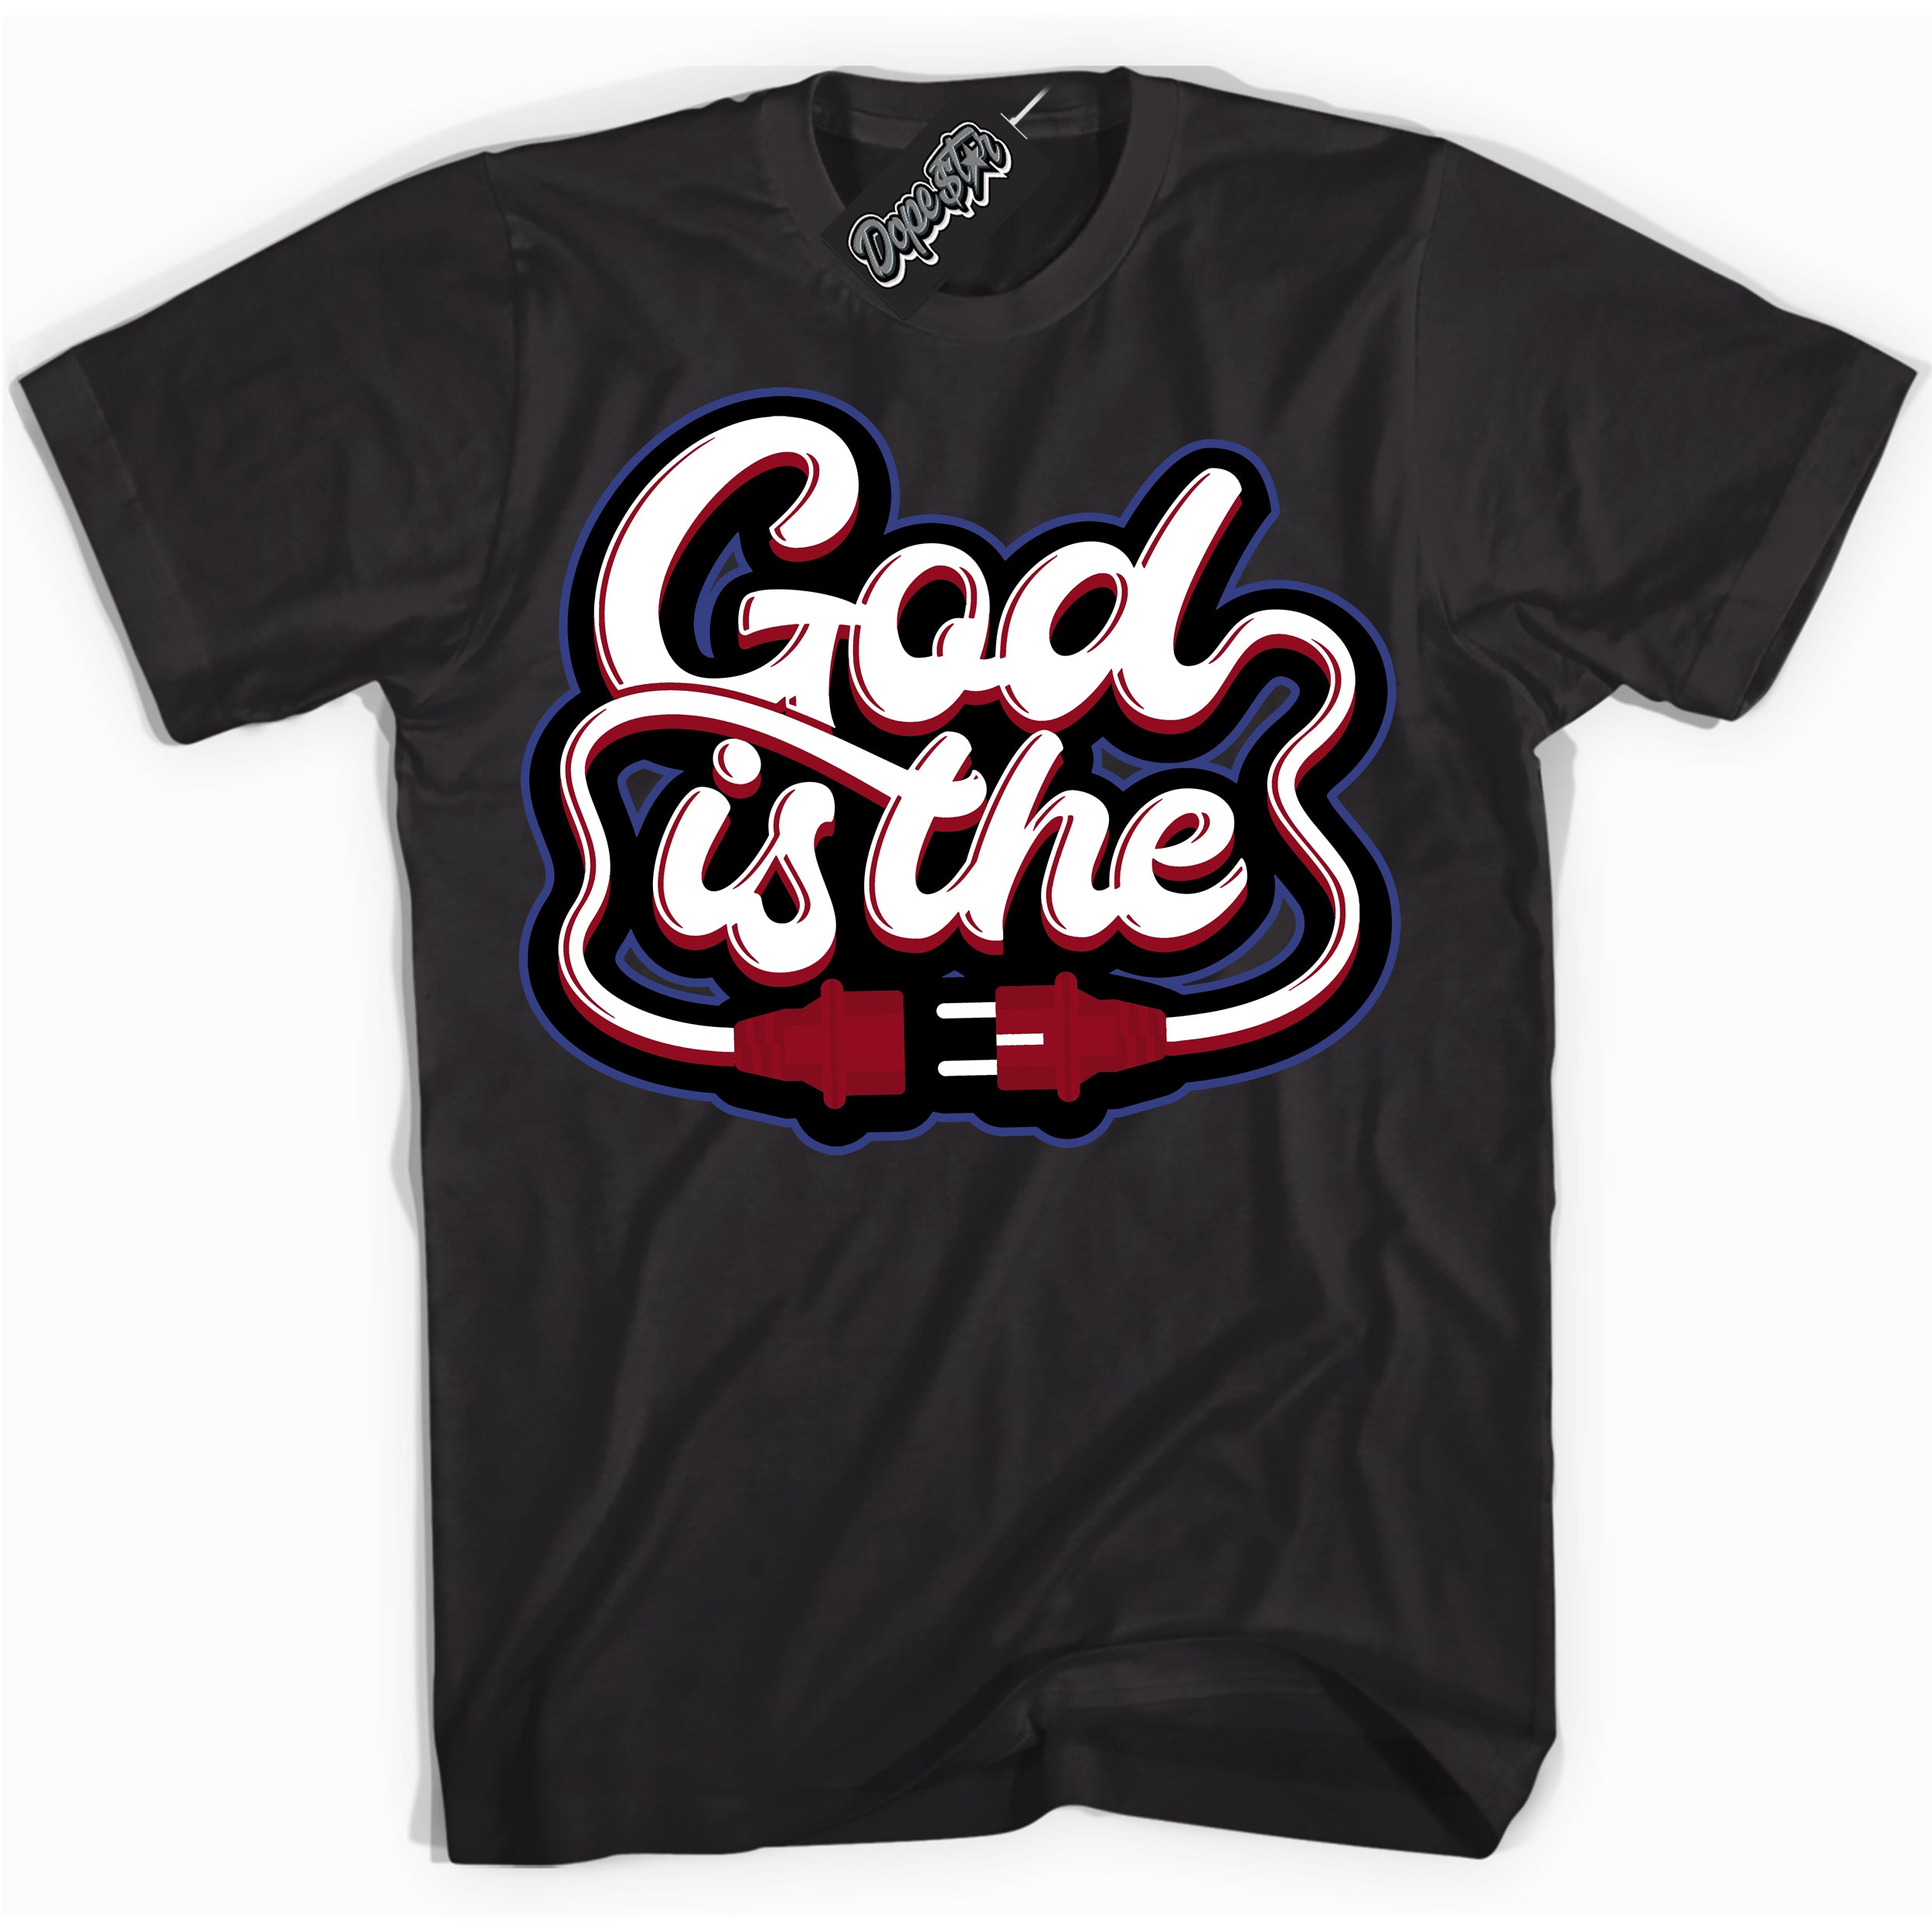 Cool Black Shirt with “ God Is The ” design that perfectly matches Playoffs 8s Sneakers.